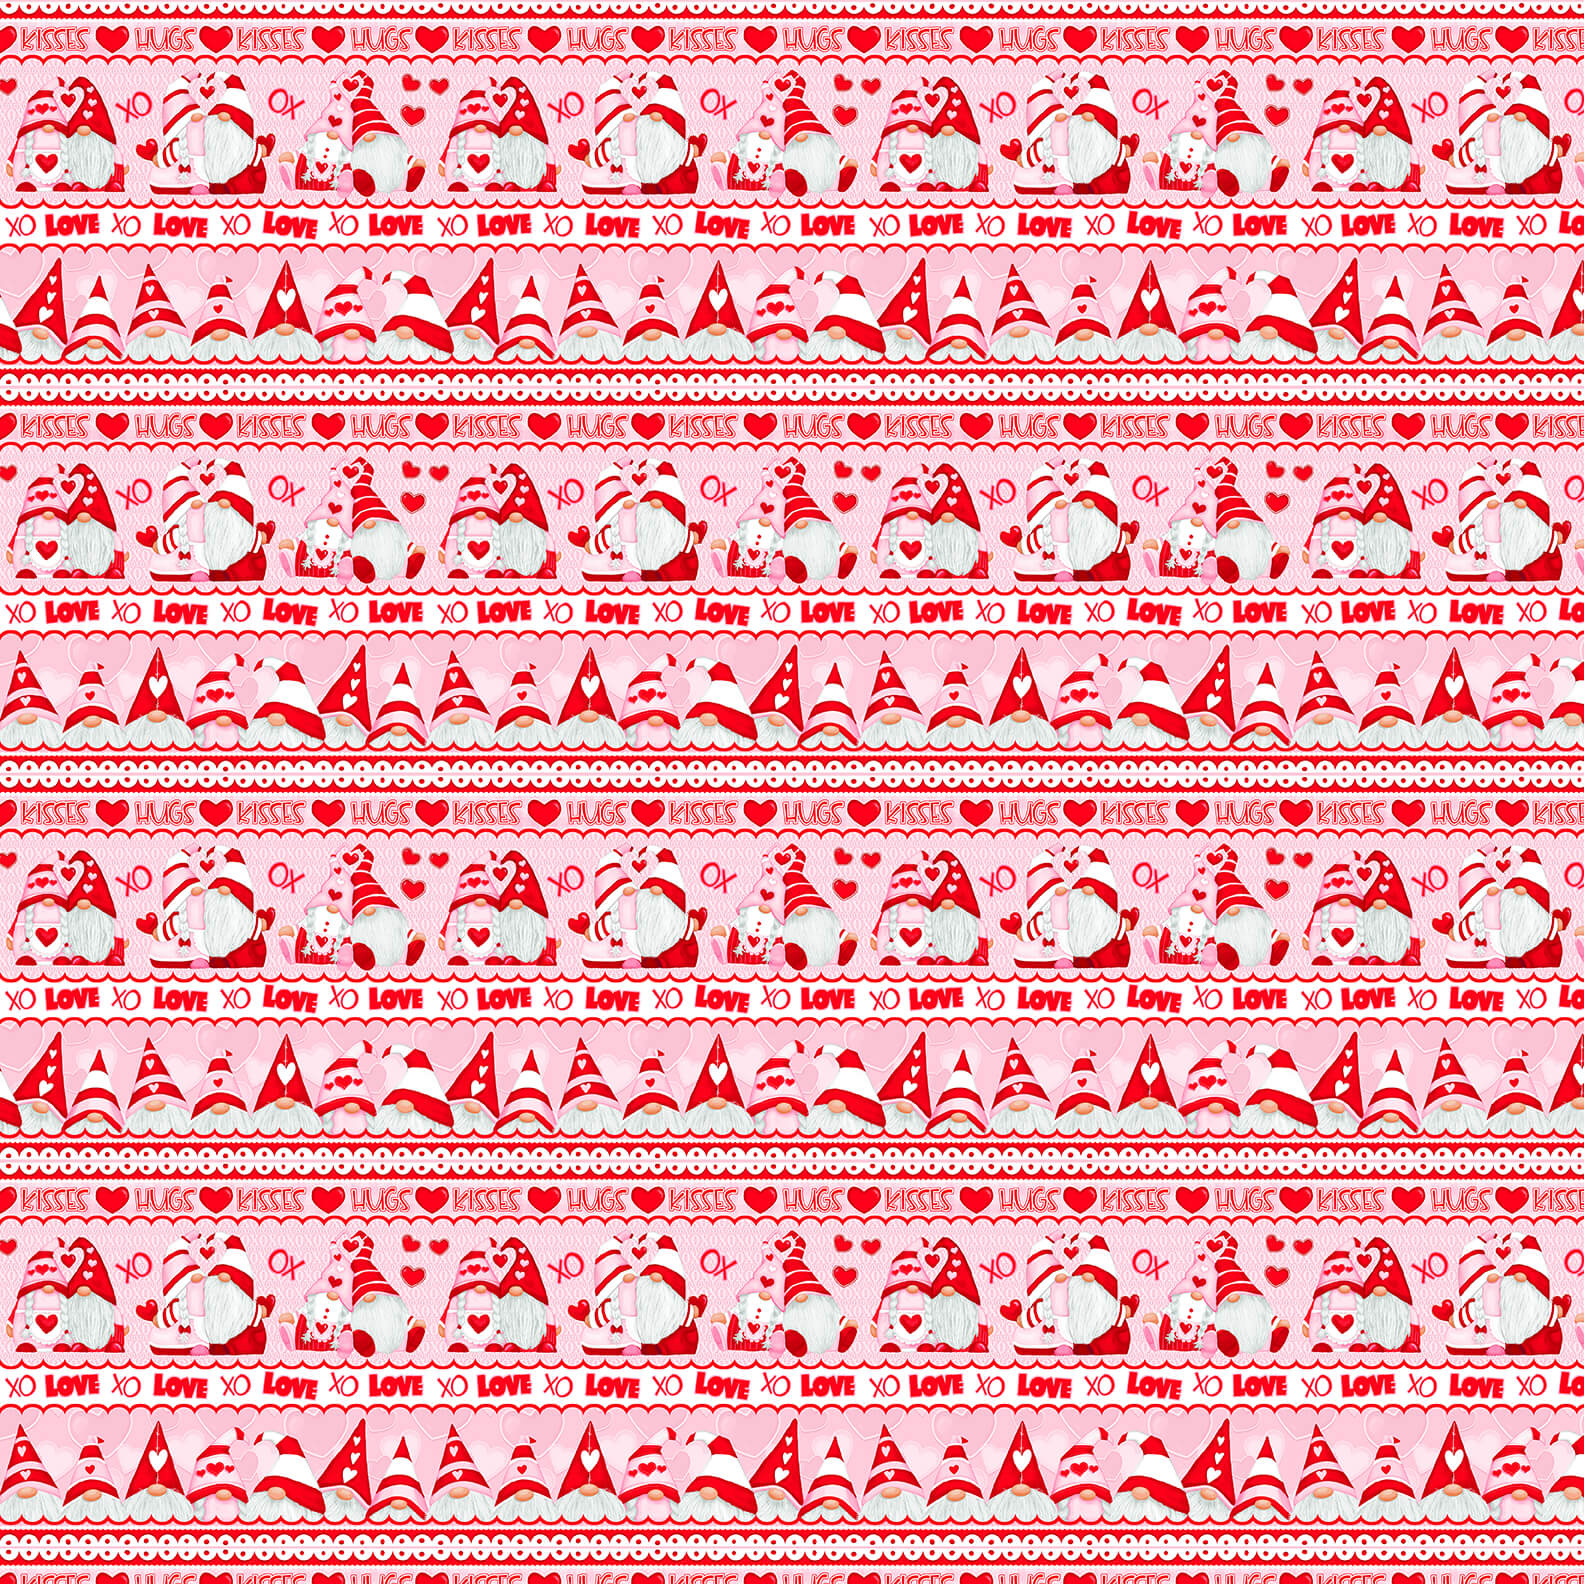 Henry Glass 1/2 yard Gnomie Love Gnome Valentine's Day Fabric - Border Stripe Quilt Cotton Fabric by the Yard